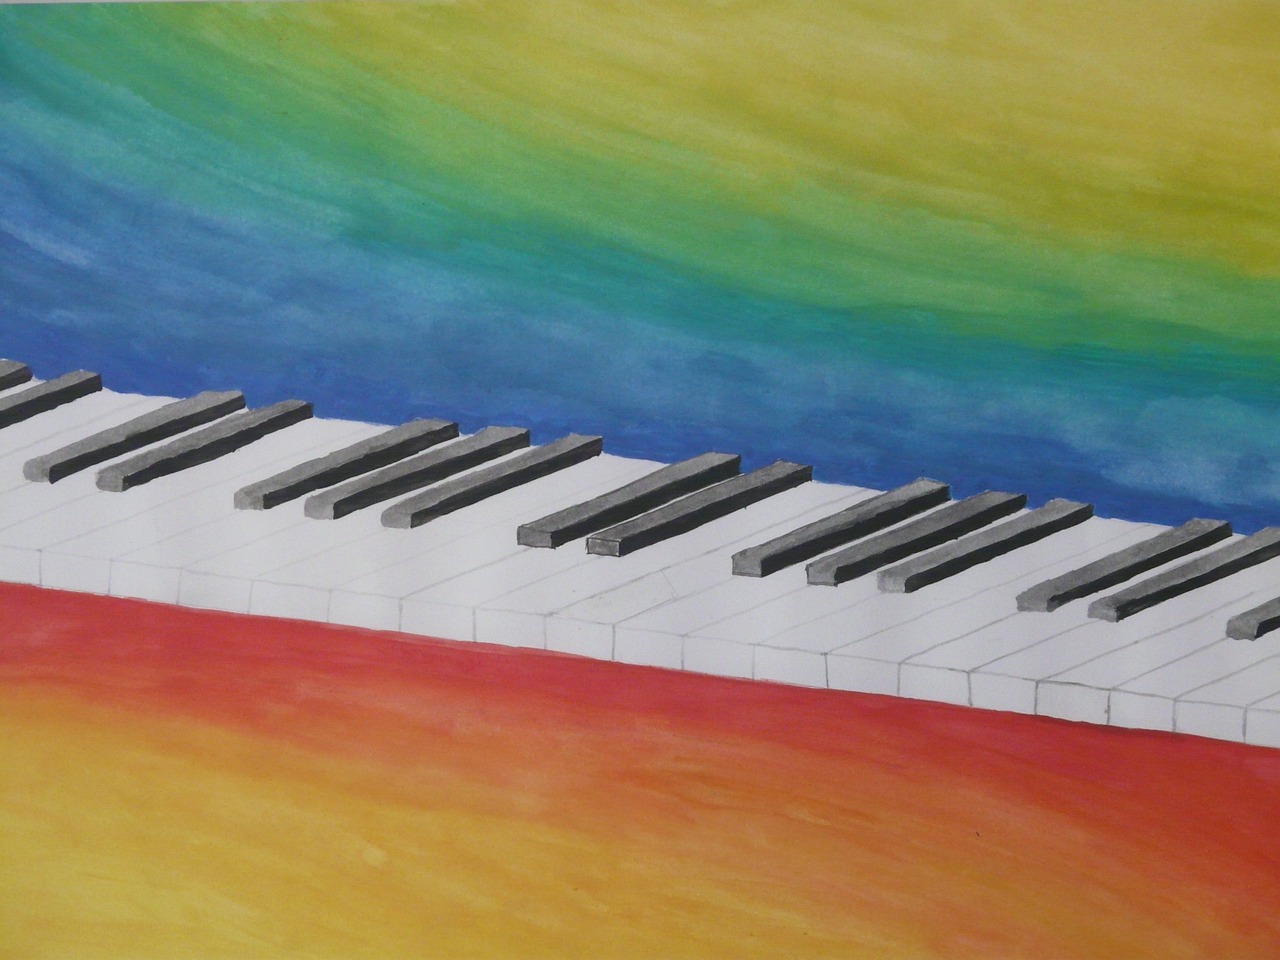 a painting of a piano with a rainbow background, inspired by Kawai Gyokudō, flickr, [ [ hyperrealistic ] ], virtuosic level detail, rainbow road, above side view